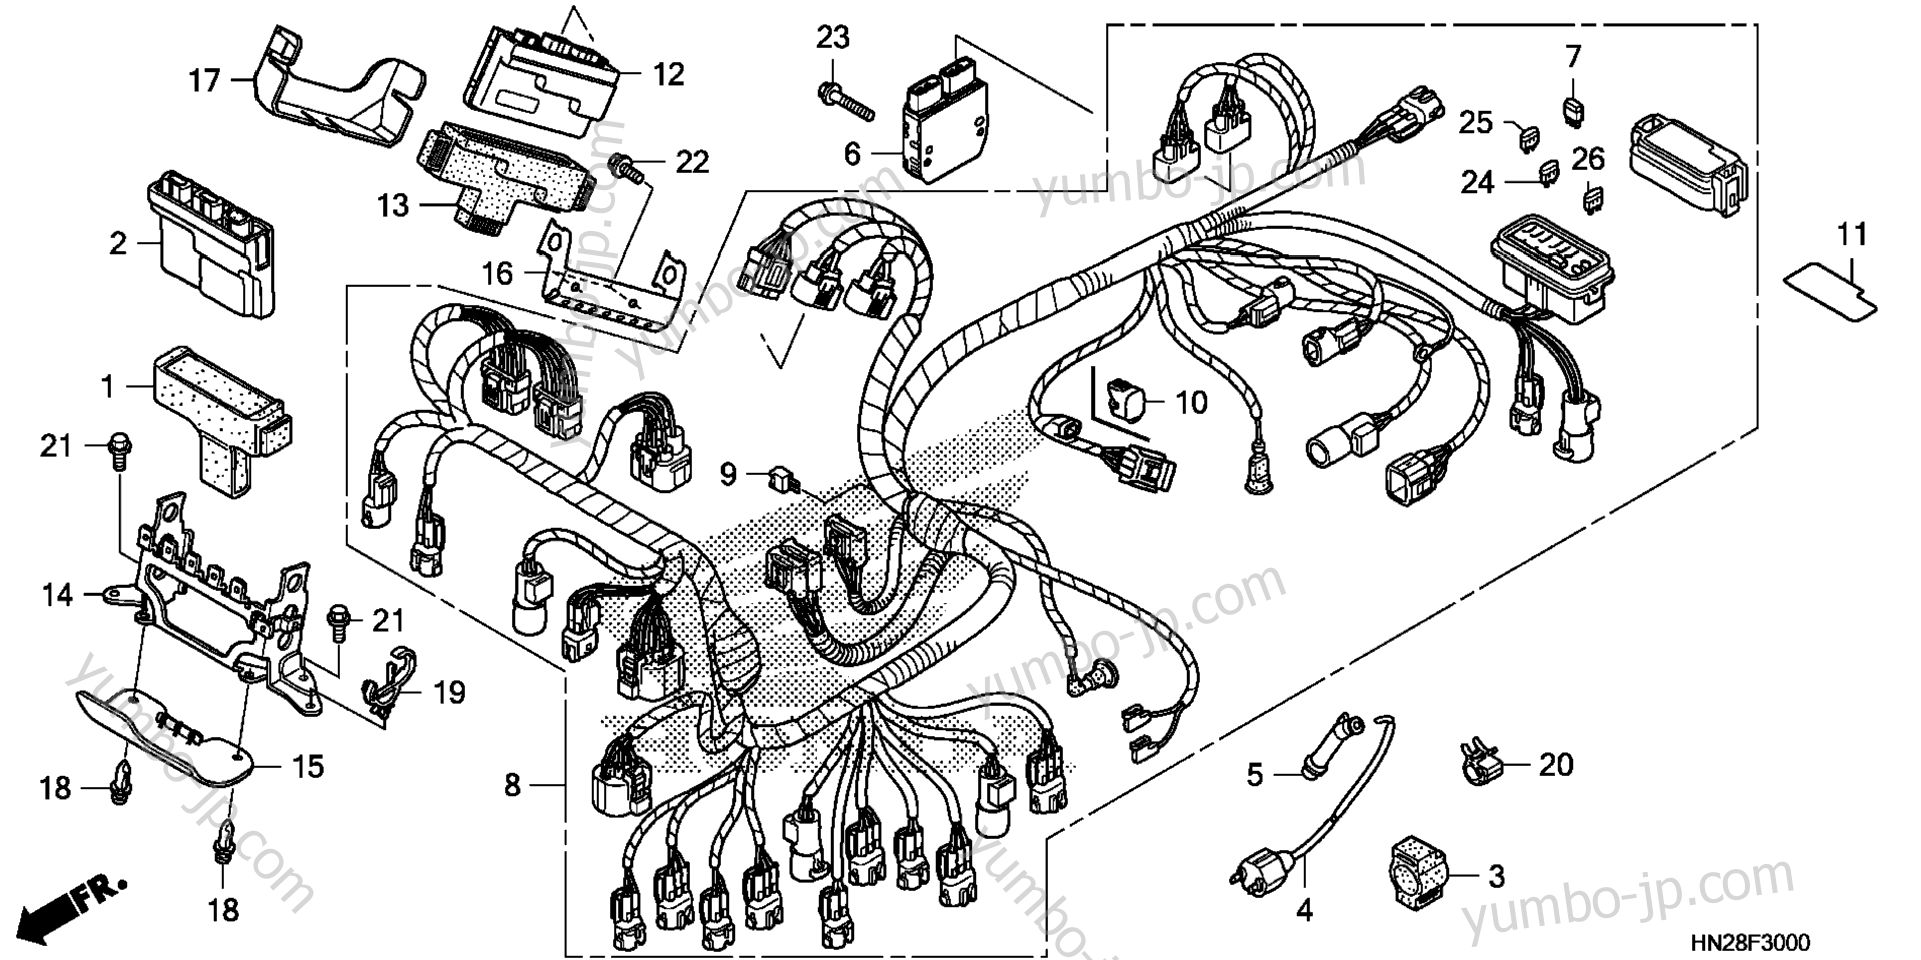 WIRE HARNESS for ATVs HONDA TRX500FPA A 2011 year